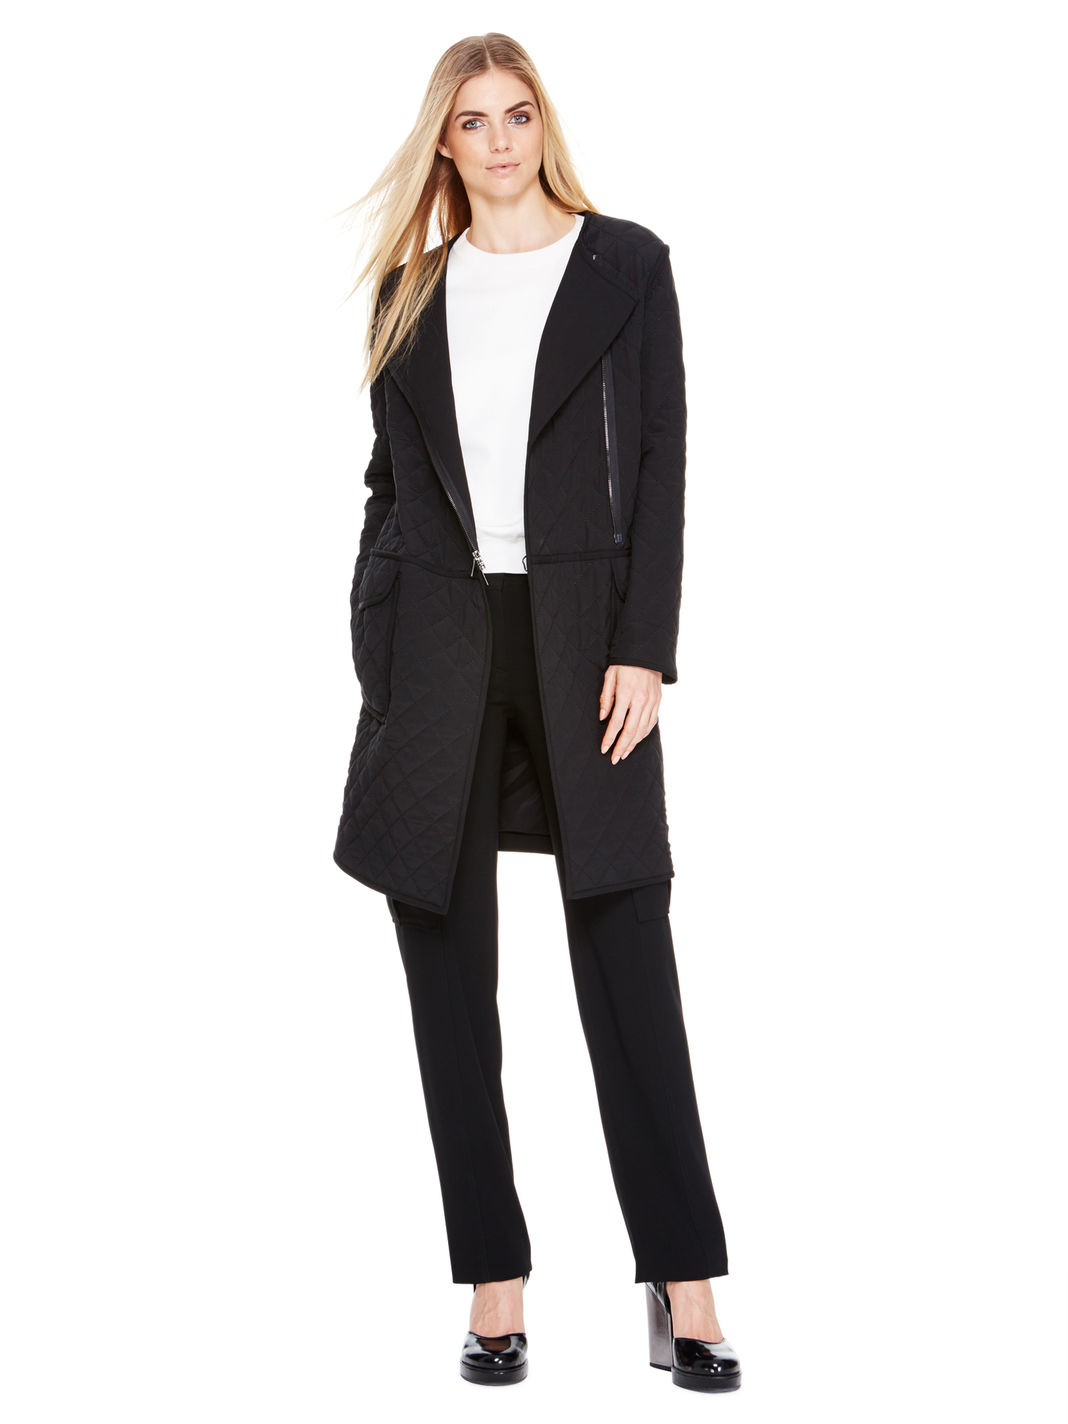 Dkny Plus Size Singlebreasted Belted Trench Coat in Black | Lyst